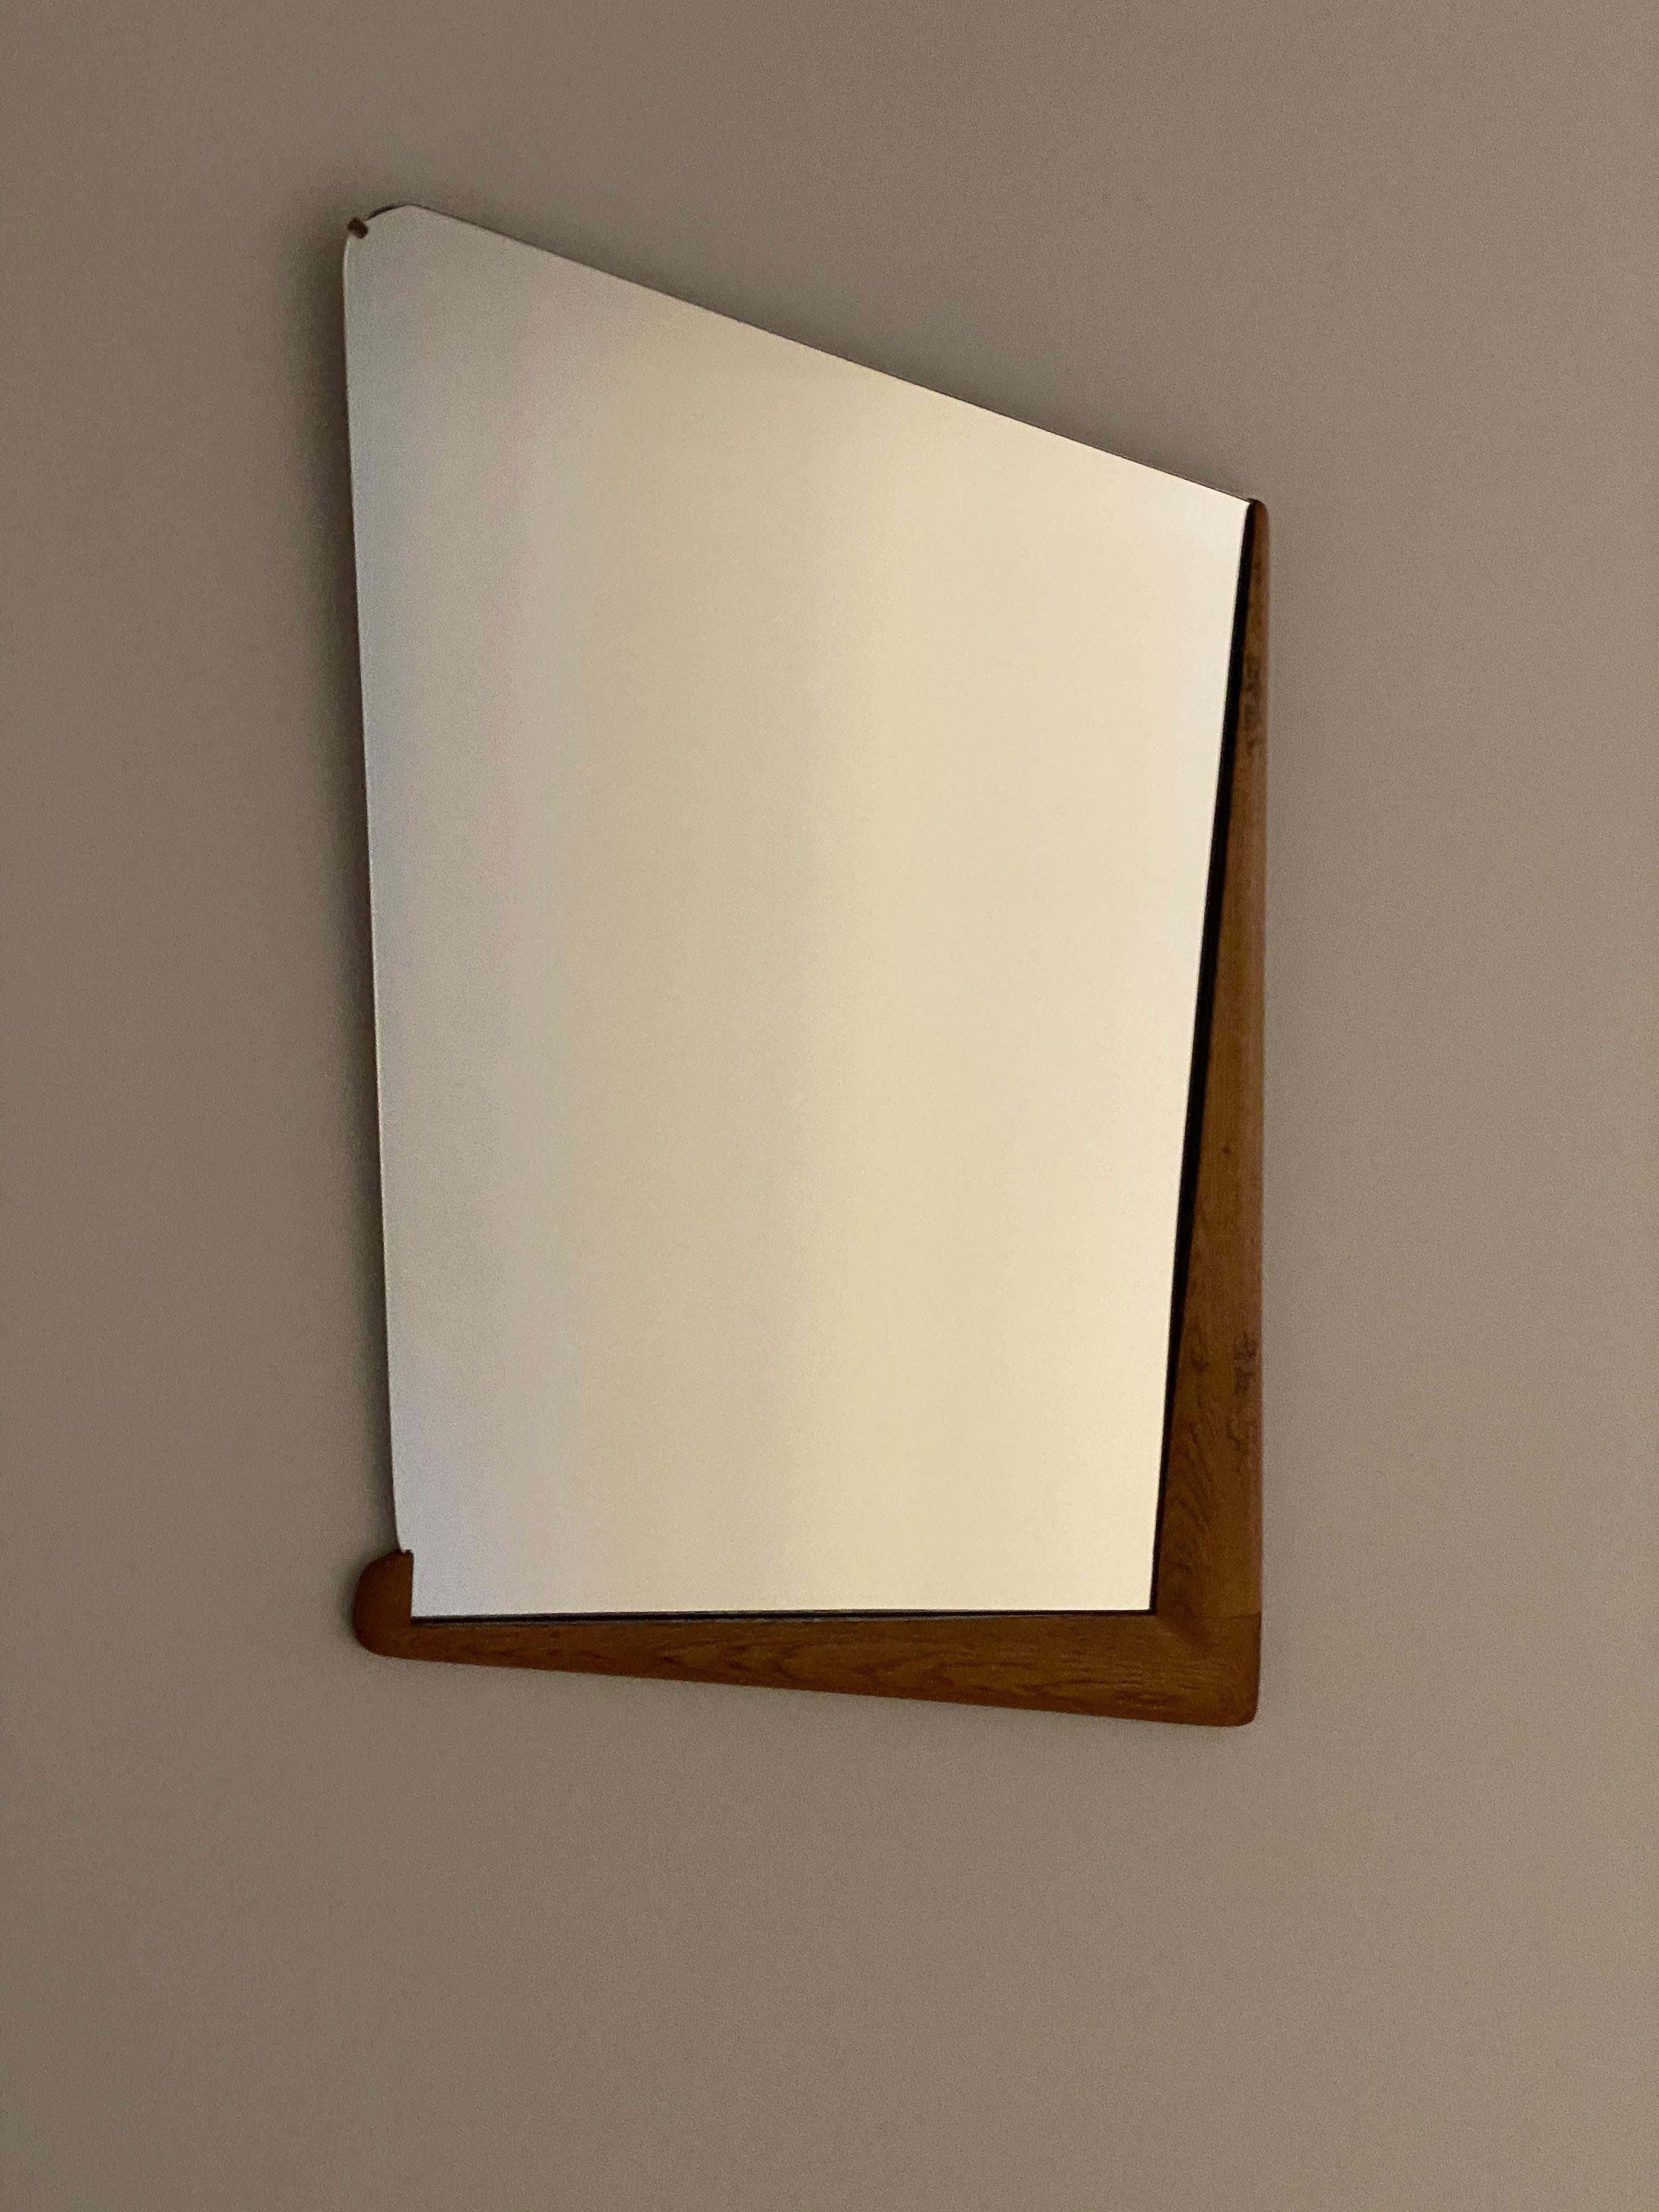 A highly modernist and sculptural asymmetric wall mirror. Produced and designed by Arnoldi Design, Sweden, 1950s. In sculpted and stained oak, black-painted inside trim, original custom-cut glass. Wood appears slightly darker in images than in